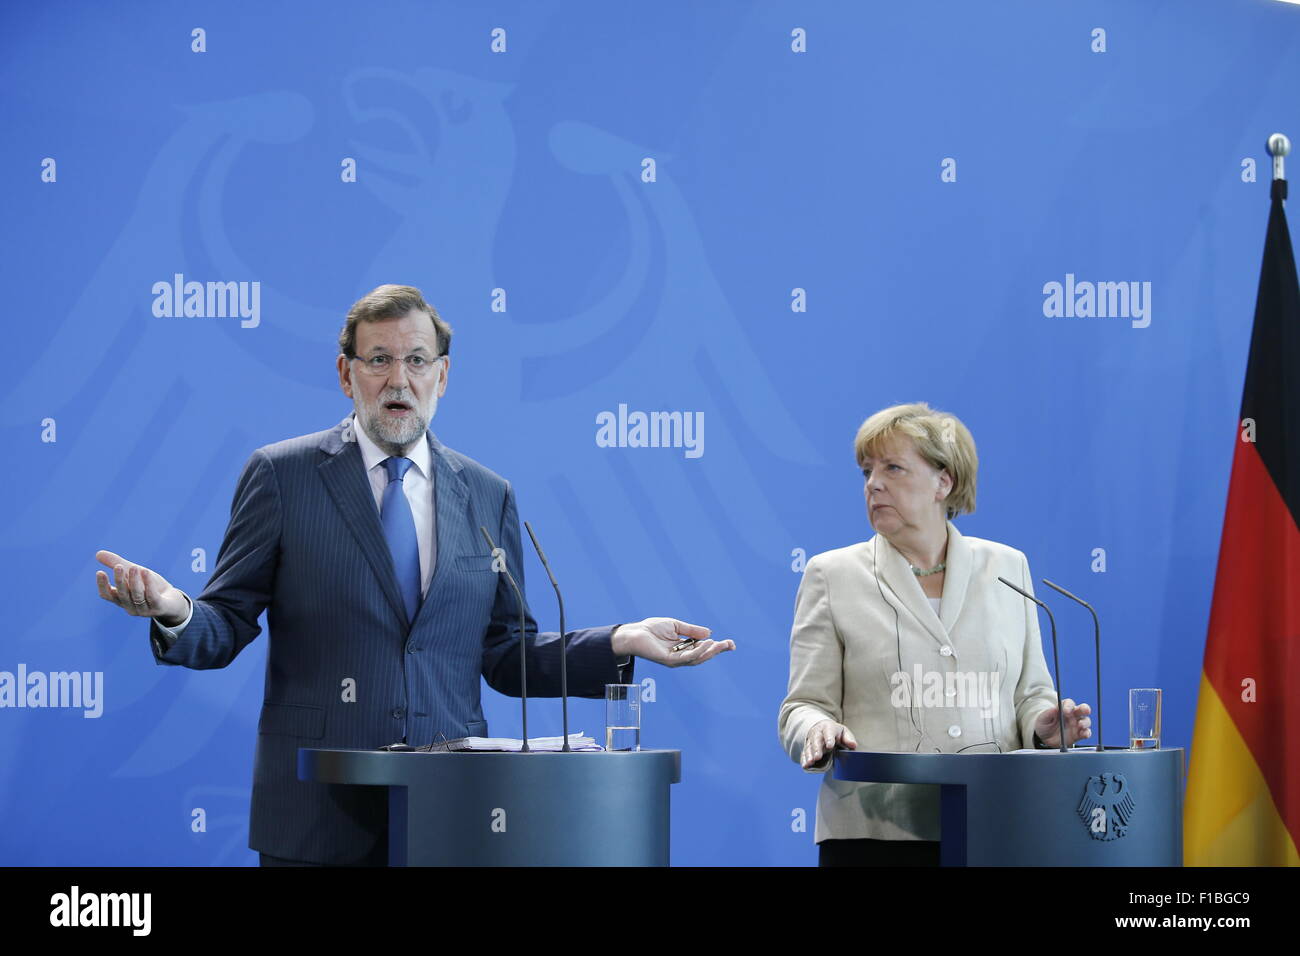 Berlin, Germany. 01st Sep, 2015. German Chancellor Angela Merkel together with Spanish Prime Minster Mariano Rajoy give a joint press conference at the German Chancellery in Berlin, German on september 01, 2015. / Picture:  Mariano Rajoy, Prime Minister of Spain, and Angela Merkel, German Chancellor. Credit:  Reynaldo Chaib Paganelli/Alamy Live News Stock Photo